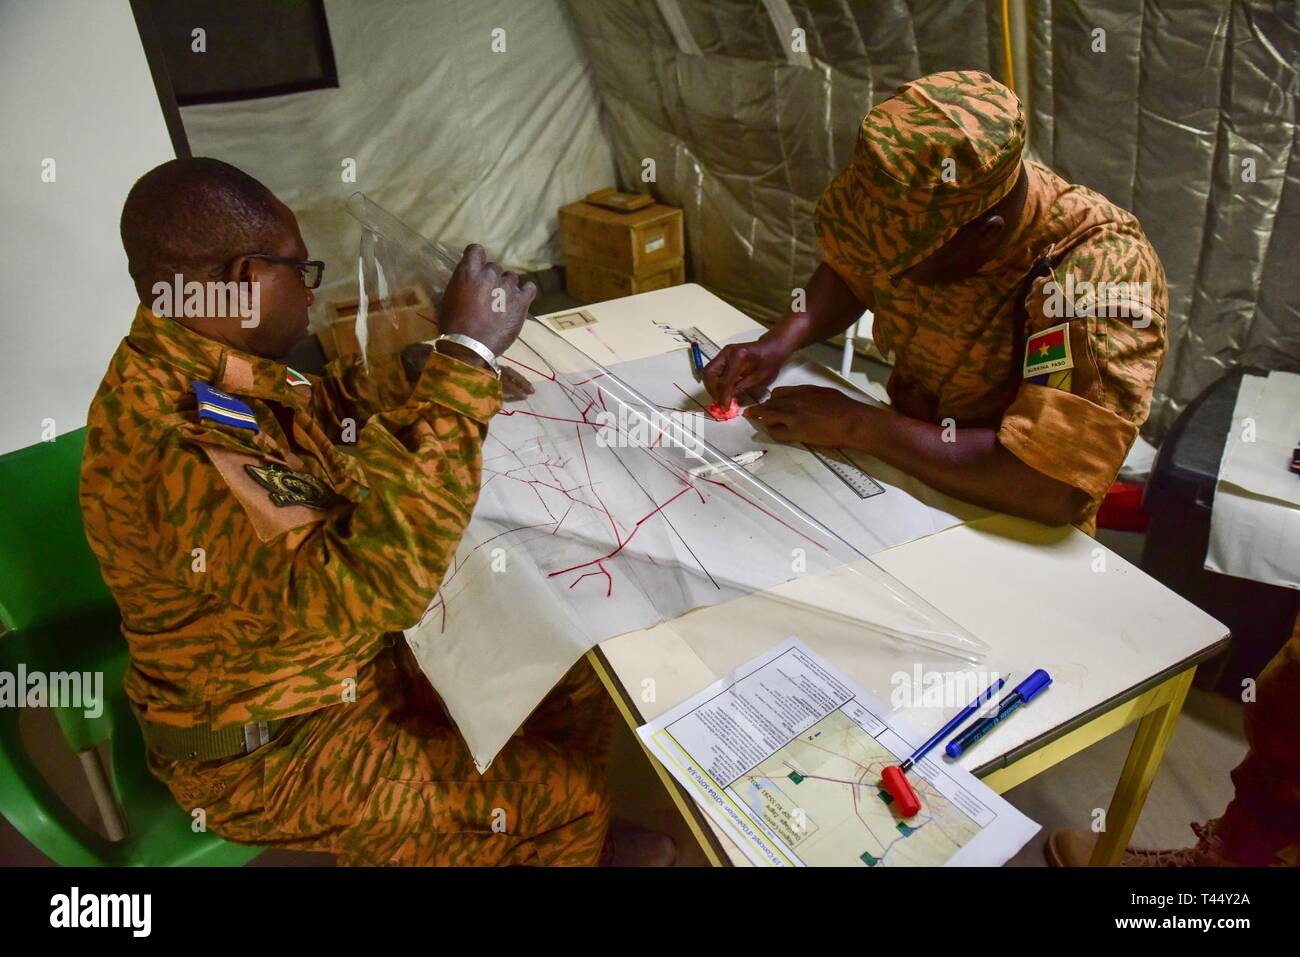 Burkina Faso Army leadership staying at base camp Loumbila conduct operations planning on Feb. 24, 2019 during exercise Flintlock 19. This team of Burkina Faso military leaders are in charge of providing command and control for all multinational western partners in Loumbila during the exercise's scenerio days. The Flintlock series of exercises provide military training opportunities that help foster relationships of peace, security, and cooperation. Stock Photo